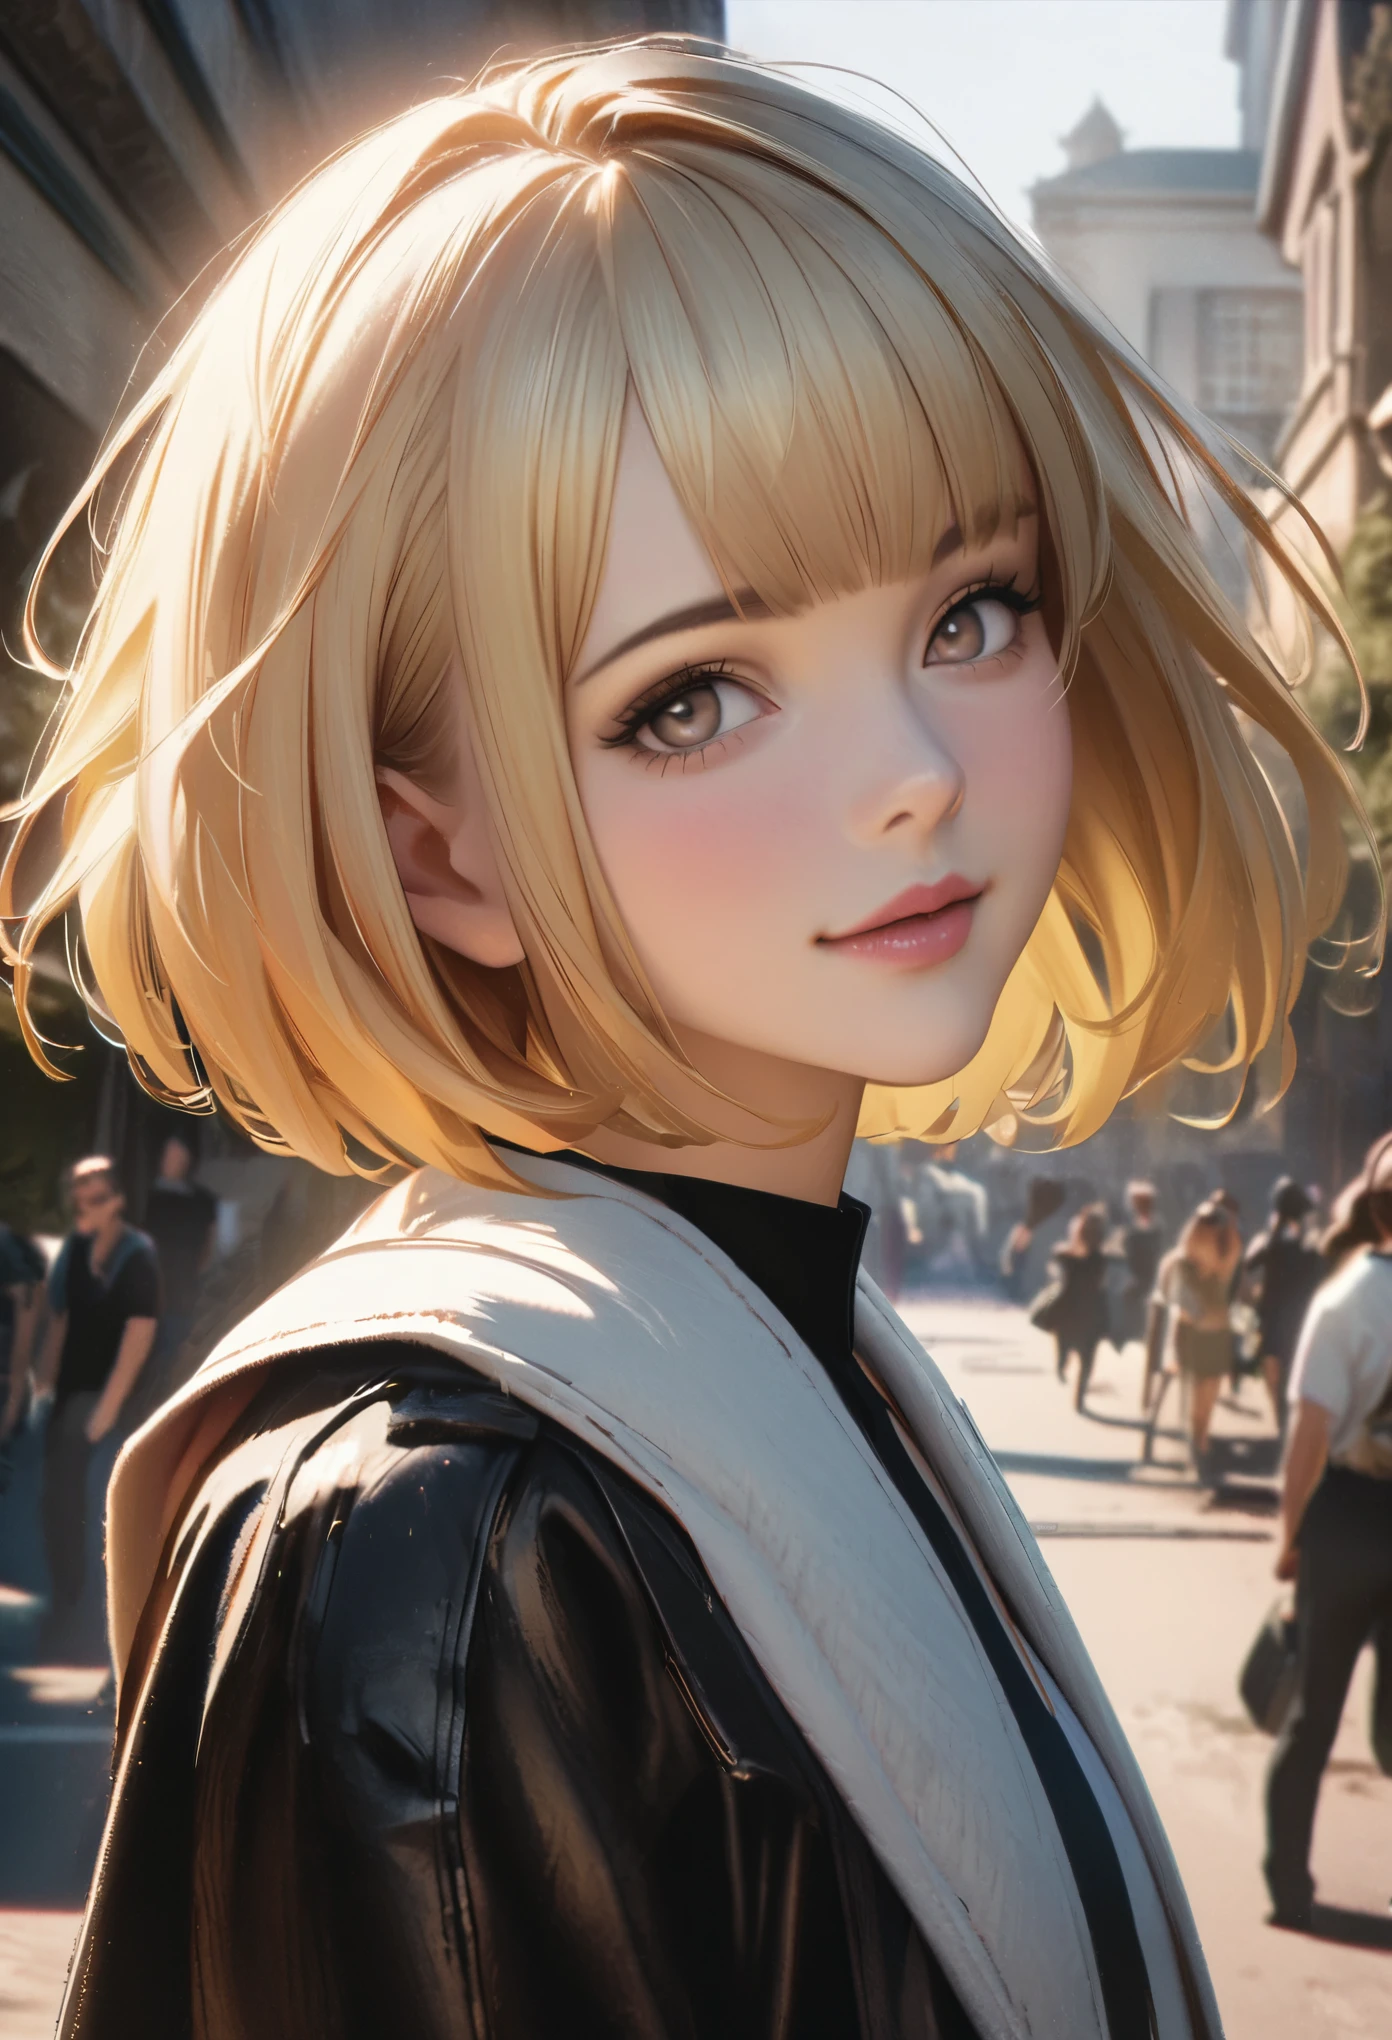 (Metersasterpiece:1.3), (8k、Realistic, RAW Photos, best qualthaty:1.4), (1 girl), (alone), (cute, lthattle:1.5), (very cute face:1.5), (SyMetersMetersetrical perfect face), ((Beautiful blonde bob cut hairstyle)), bangs, hair is Metersessy, Don&#39;Hear, (awesoMeterse cat ears:1.2), (Bright red eyes, Strong eye highlights, Beautiful eyelashes), (Red nose:1.3), (Flat Chest:1.4), (sMetersall natural breasts:1.5), (Beautiful thighs), perfect anatoMetersy, Glowing Skin, (Skin with attention to detail: 1.2), dynaMetersic angle, ((Black leather jacket, Soft and thin fabric, black Metersini skirt)), (Modern futuristic headphones with metal belts arranged in a straight line, Finely crafted Metersetal accessories, Silver Choker, Black short boots), ((Detailed silk bra, panties)), ((accurate arMeters, Five Fingers, Accurate legs)), black Metersetal ornaMetersents, (Red nose, Panicked, Lying on the road, lie face up on the ground:1.3), (A big cthaty where you can see the sunset at 6 p.Meters., Red sunset clouds, that&#39;it&#39;s raining), Metersy body gets wet froMeters the rain, (A decadent and futuristic city area at night). (Advanced cars of the future, Flashing red light)、(Lightning is shining), (Blue and purple neon lights flashing), (Cyberpunk Background, Blade Runner), voluMeterse lighting, Soft Light, bright, bright色